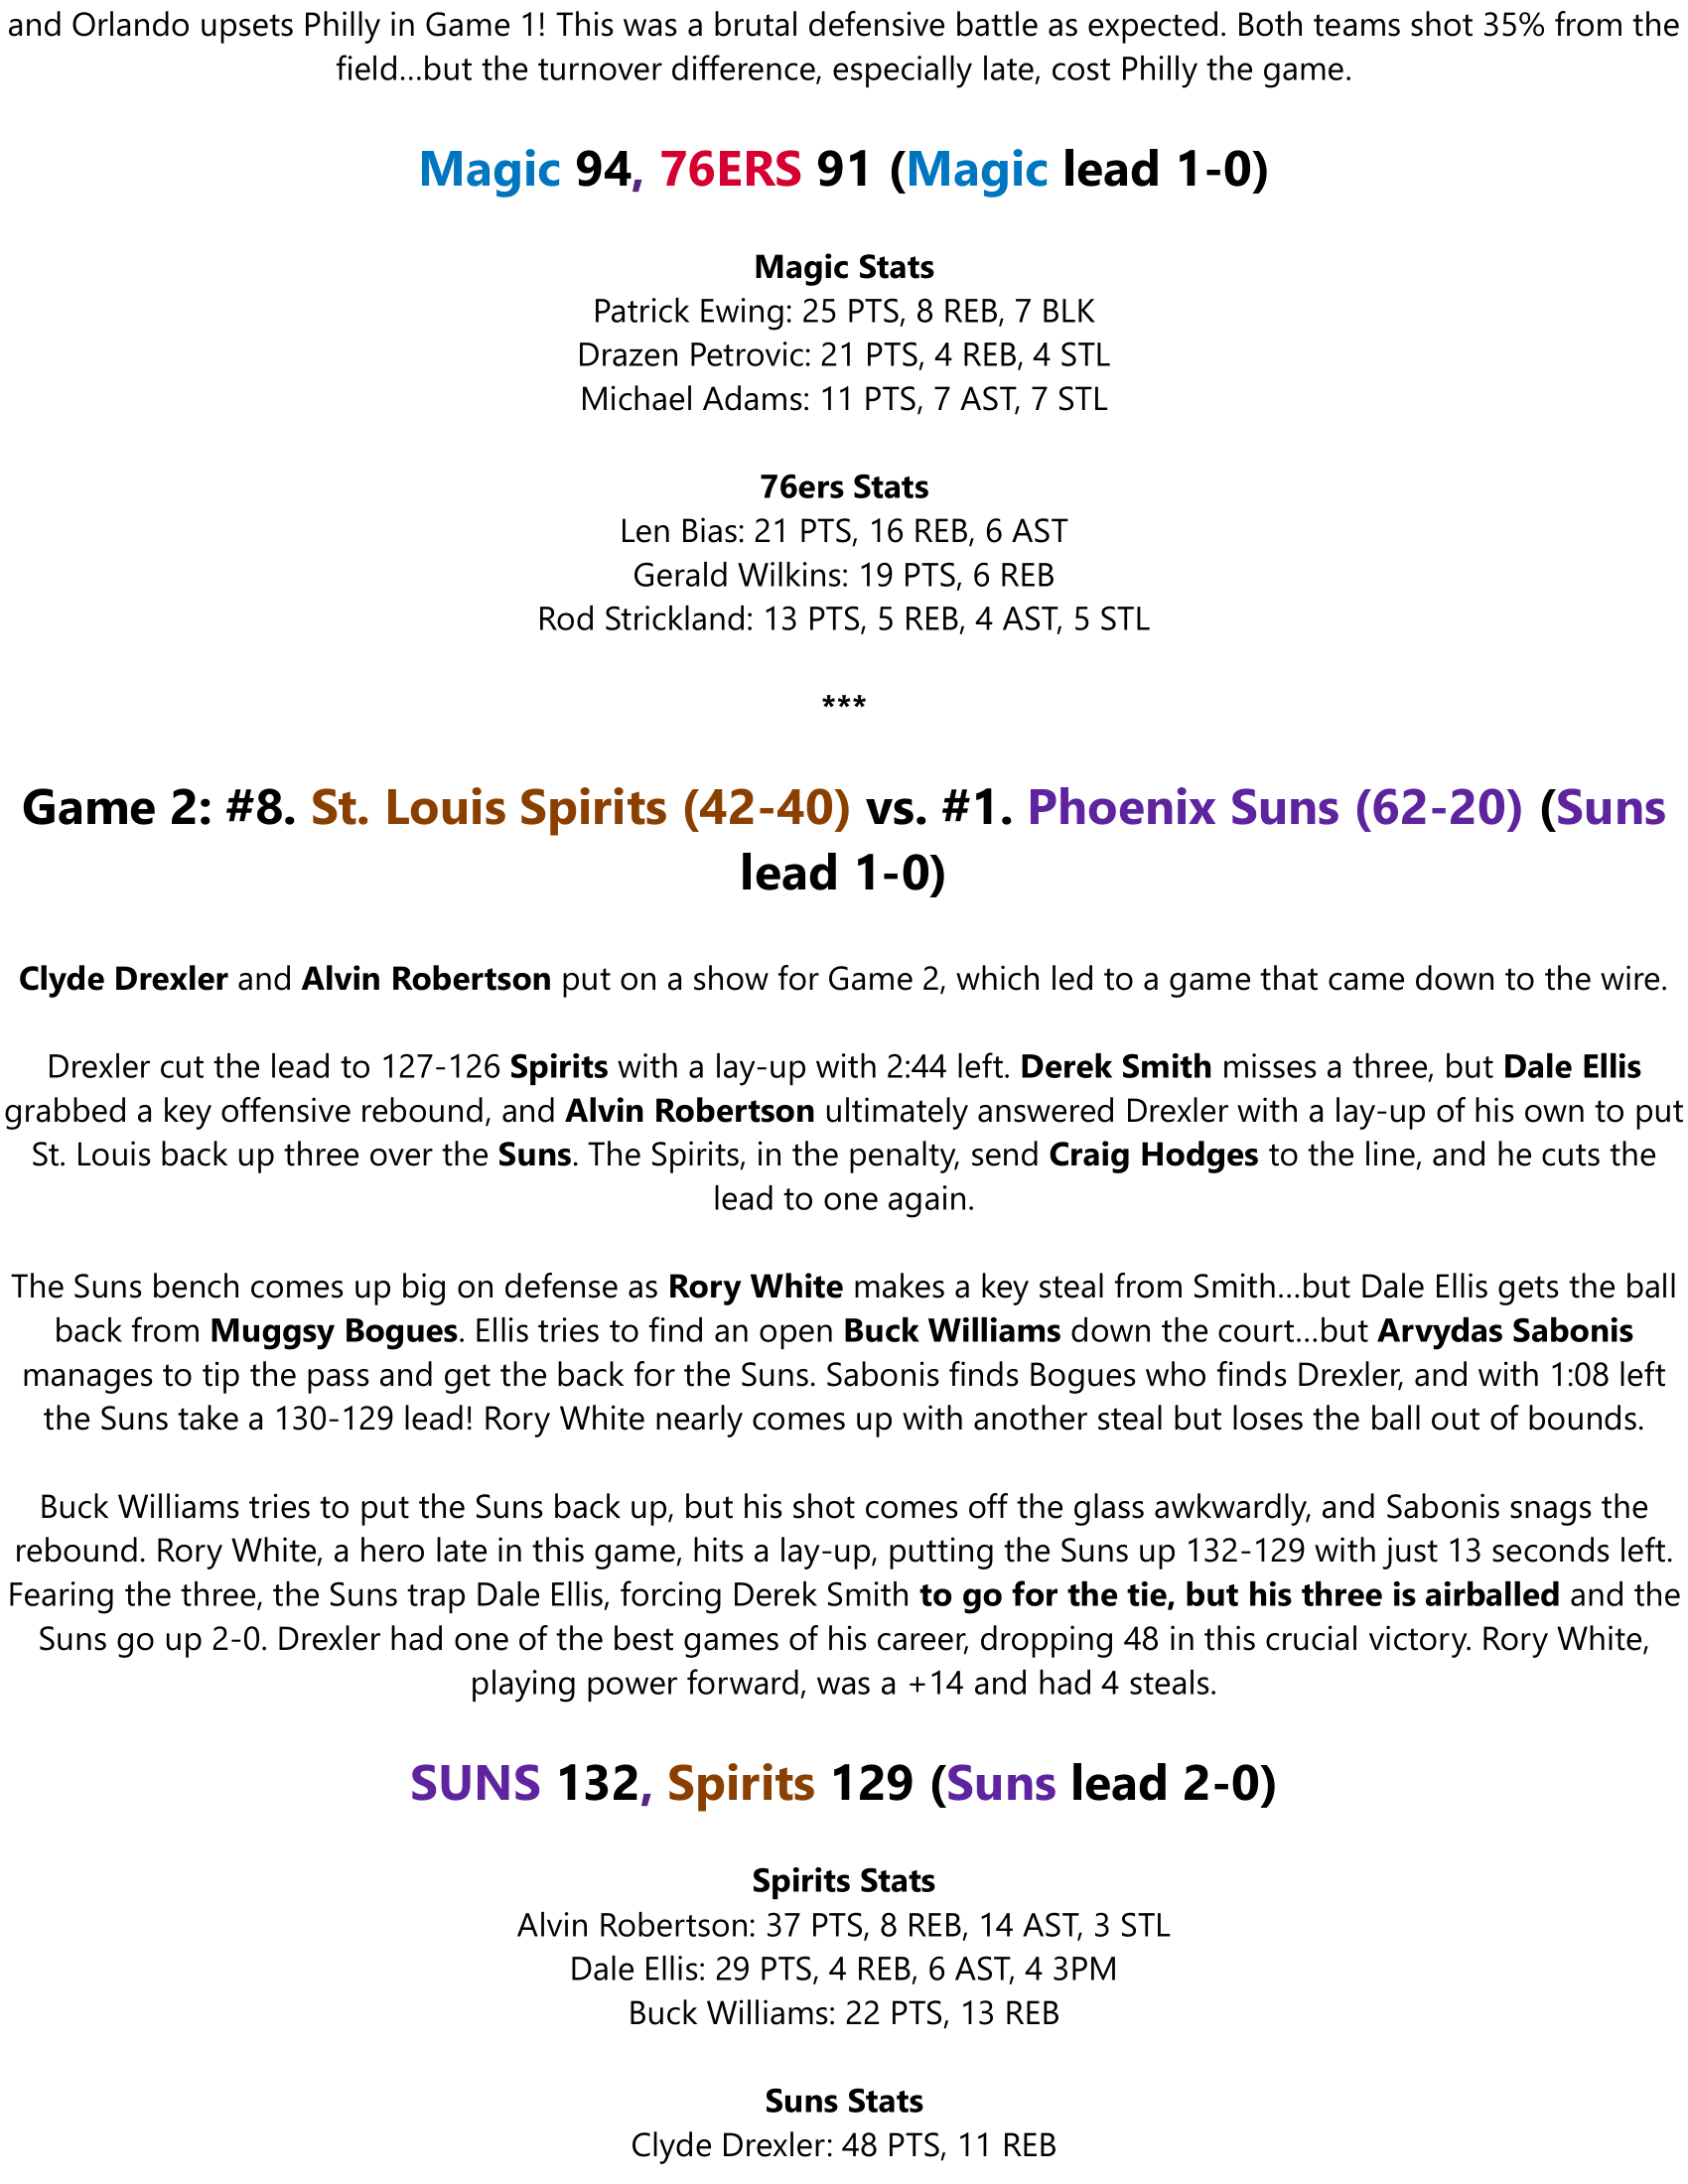 89-90-Part-5-Round-1-Semi-Preview-05.png